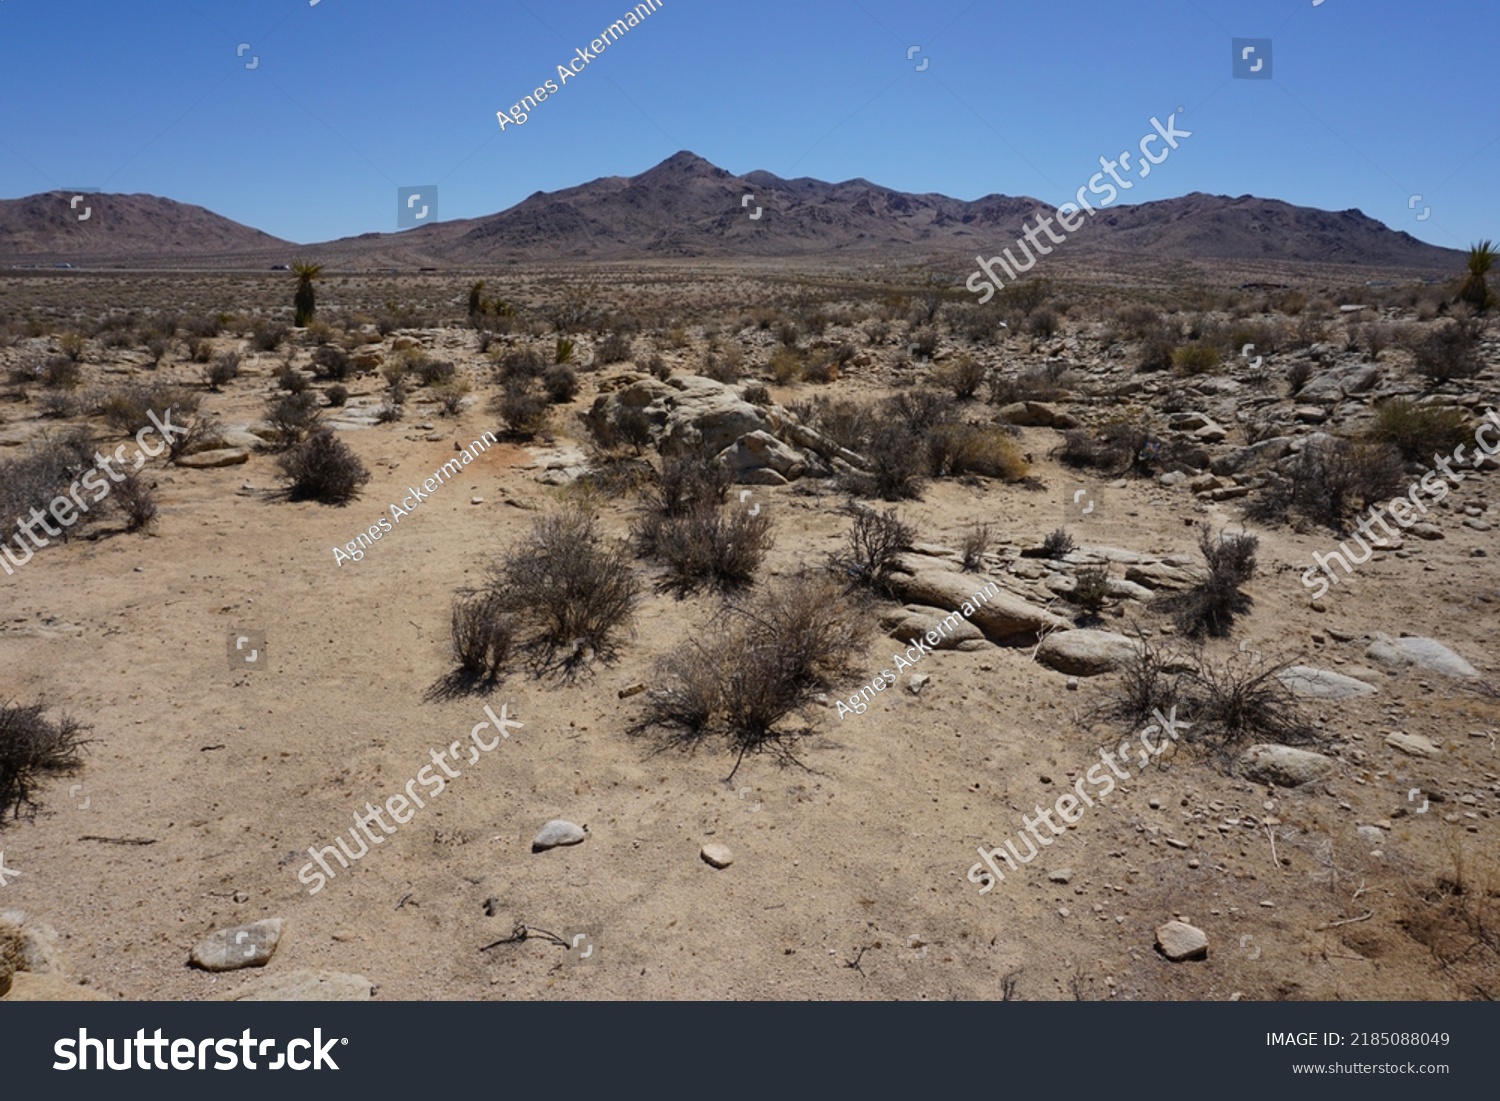 Arid desert landscape of western Mojave desert in California, USA with the dry land of sand and rocks, the dried out bushes and desert vegetation in the foreground and the blue summer sky in the back. #2185088049